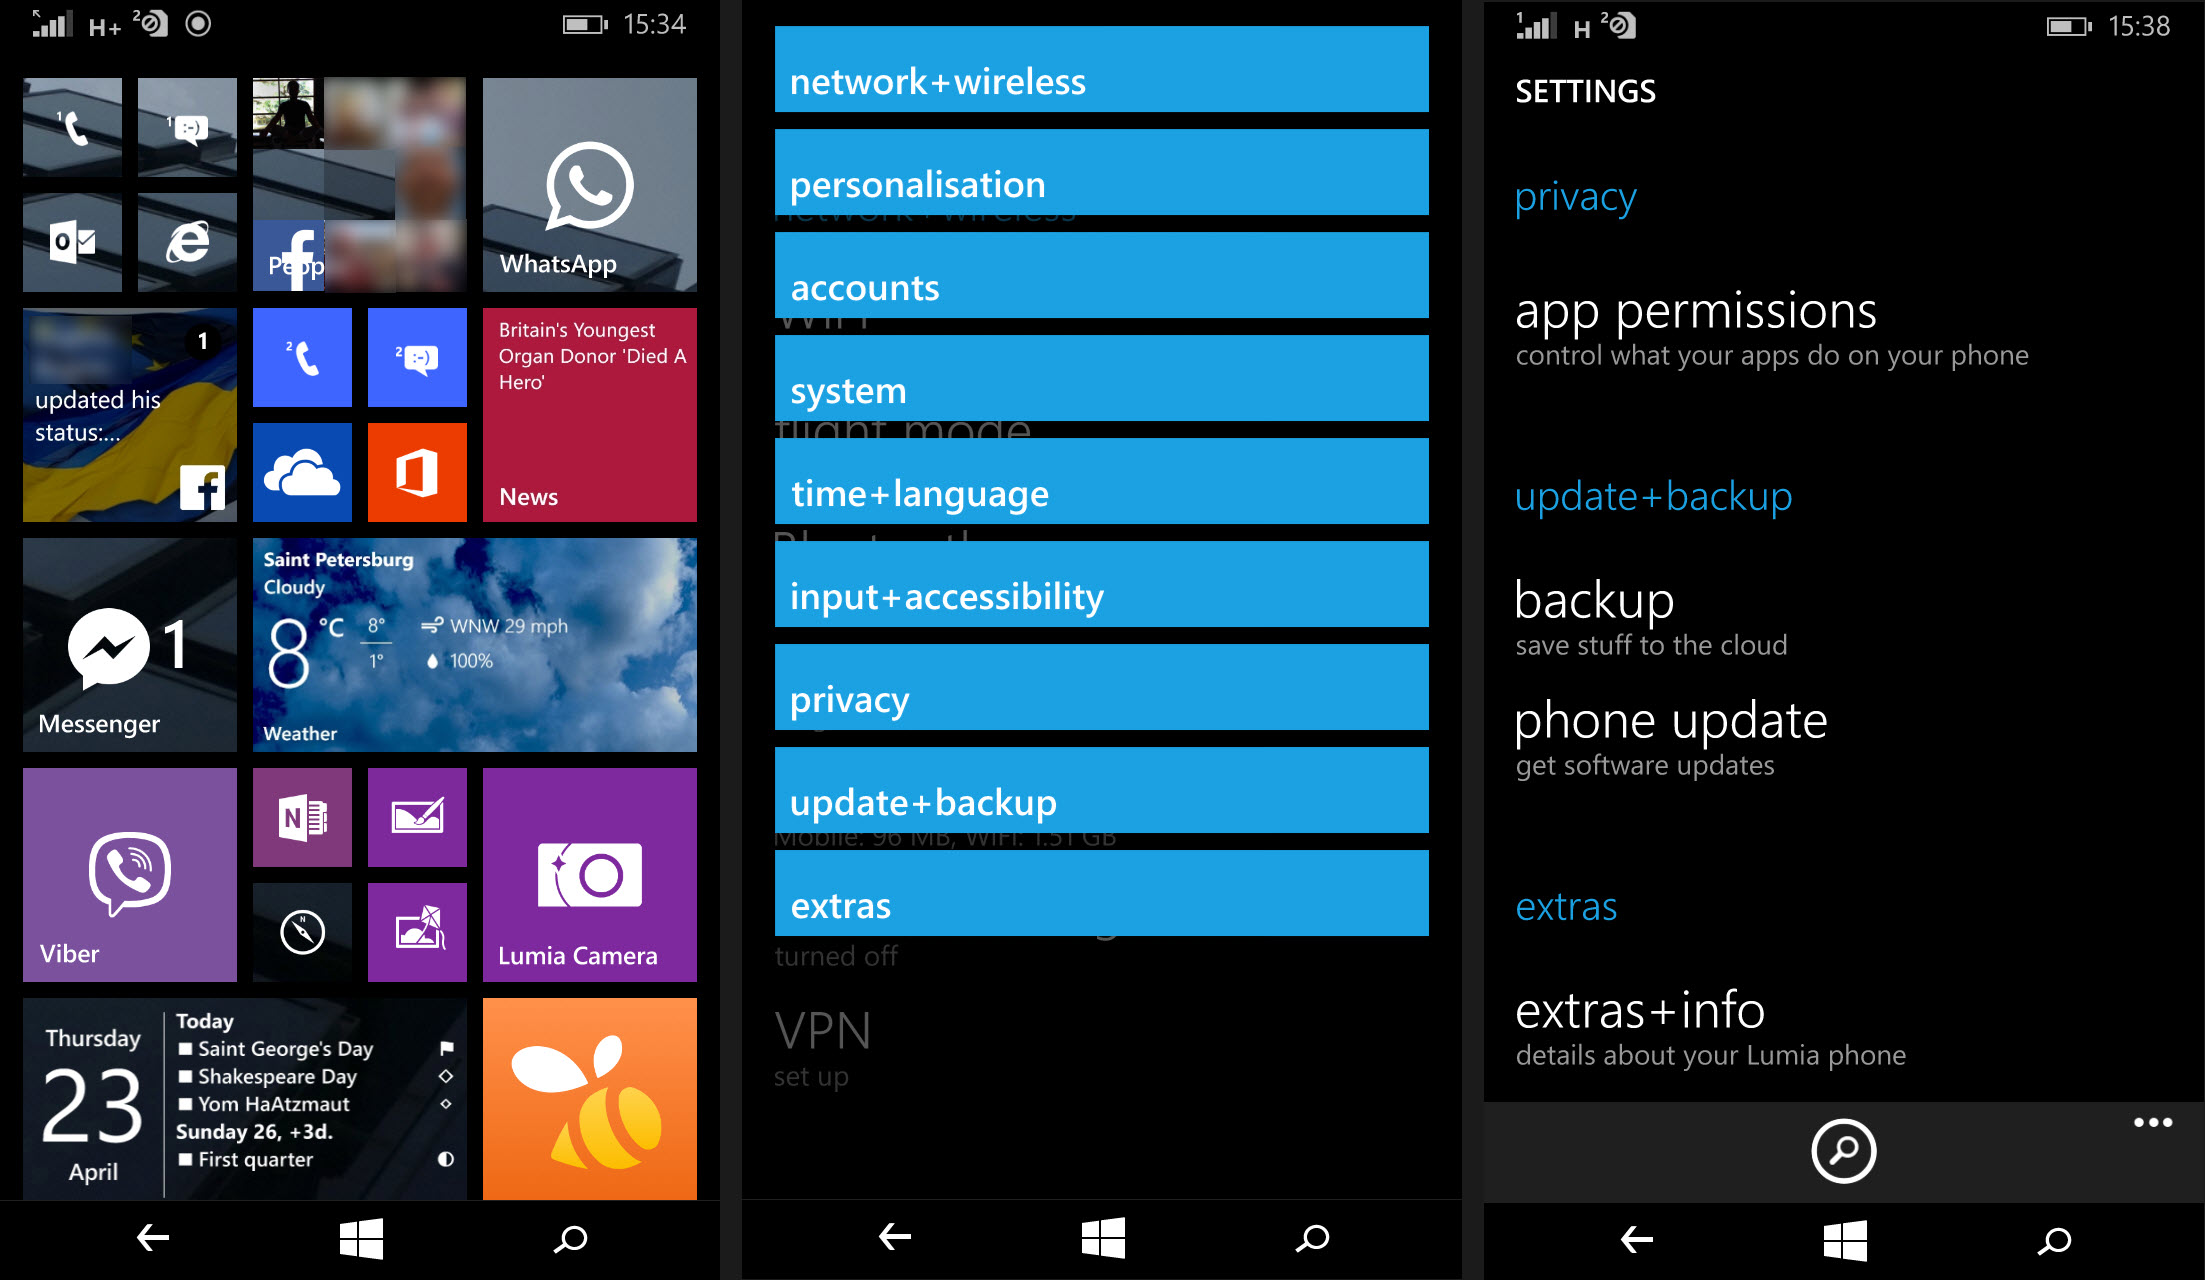 Windows Phone 8.1 Update 2 (Image Credit: Russell Smith)